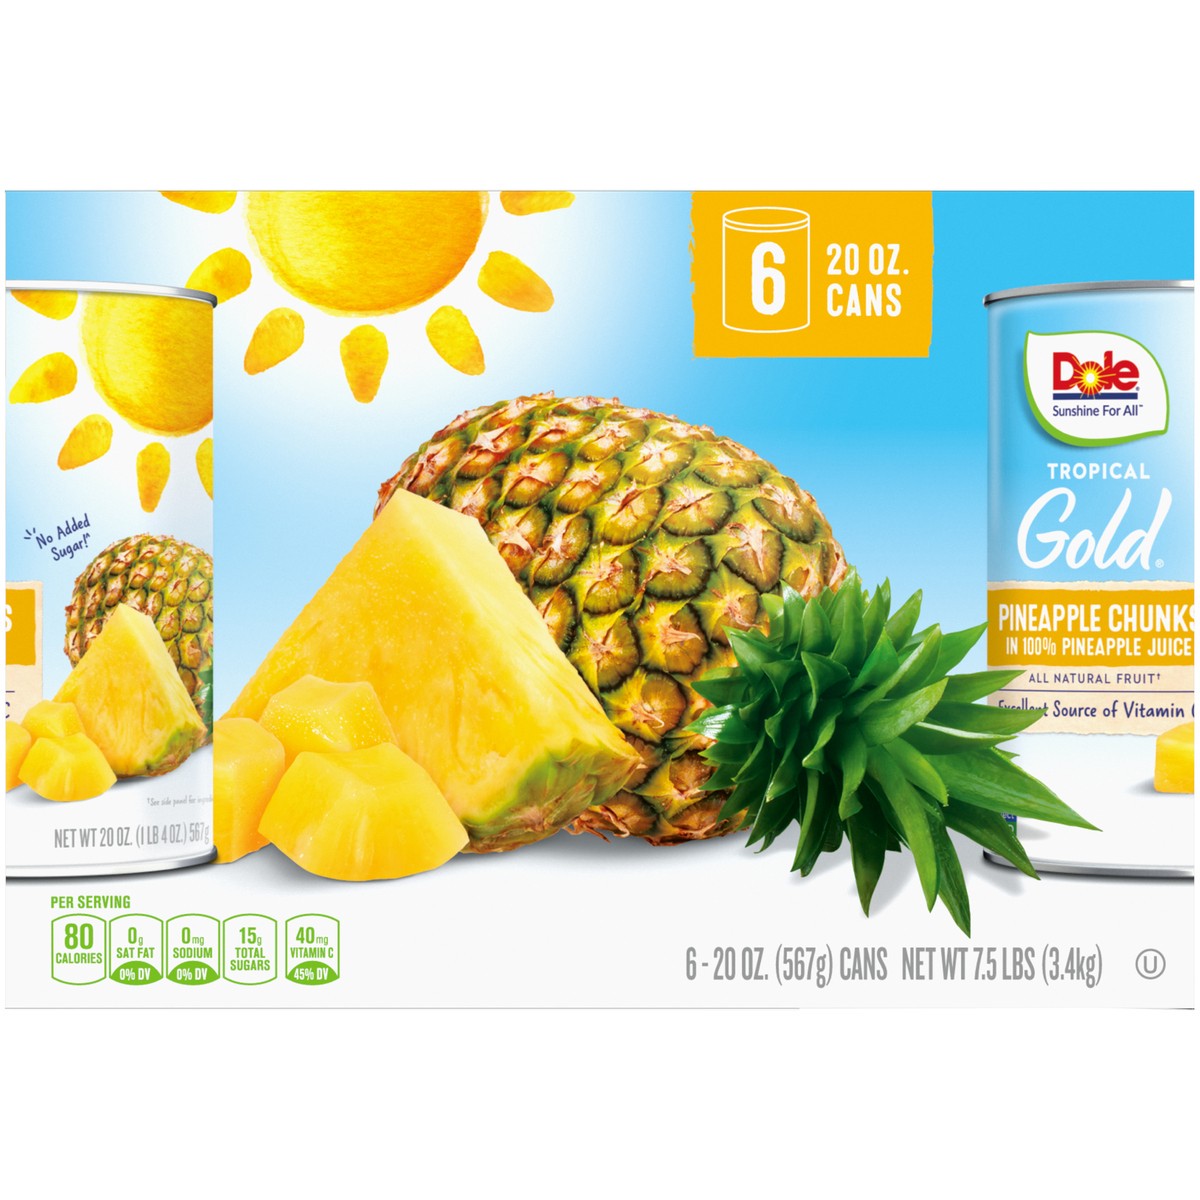 slide 7 of 9, Dole Tropical Gold Pineapple Chunks in 100% Pineapple Juice 6-20 oz. Cans, 7.5 lb